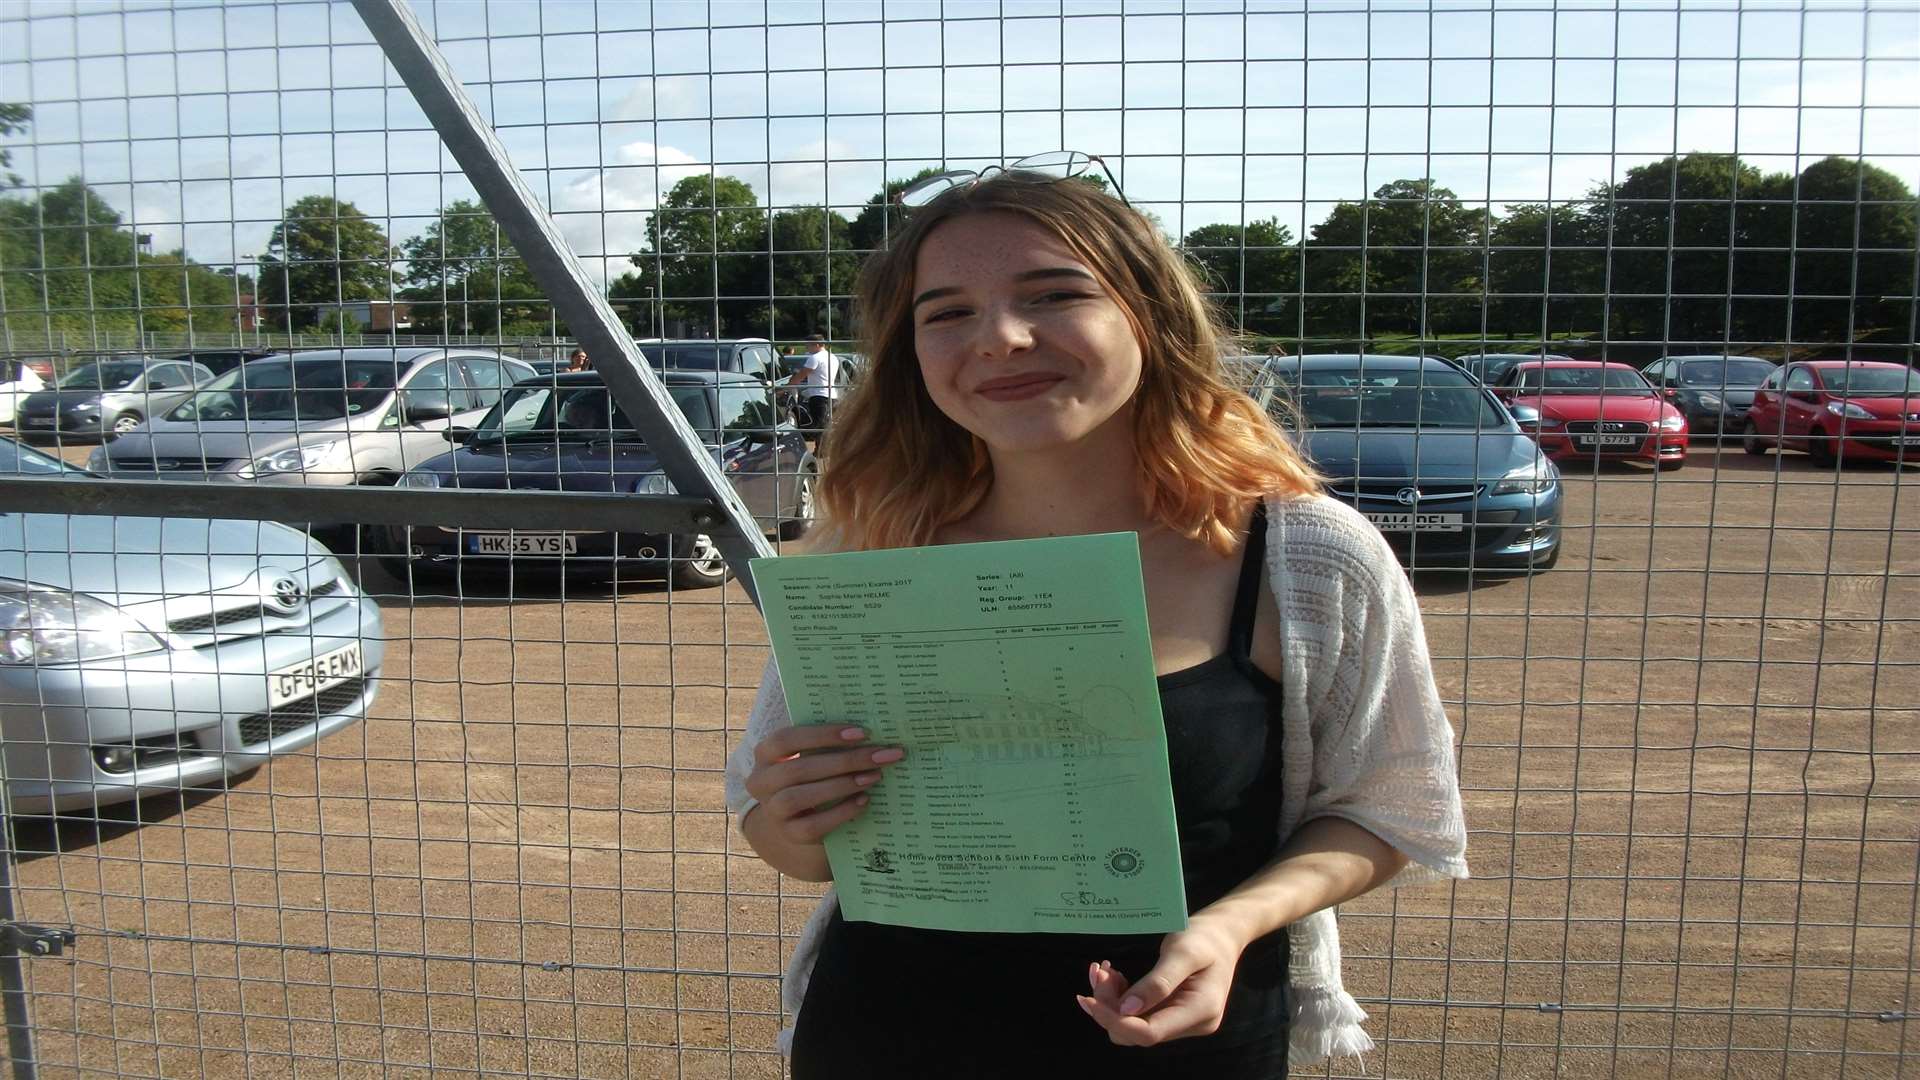 Sophie Helme was delighted to receive a 9 in her English literature and language GCSE